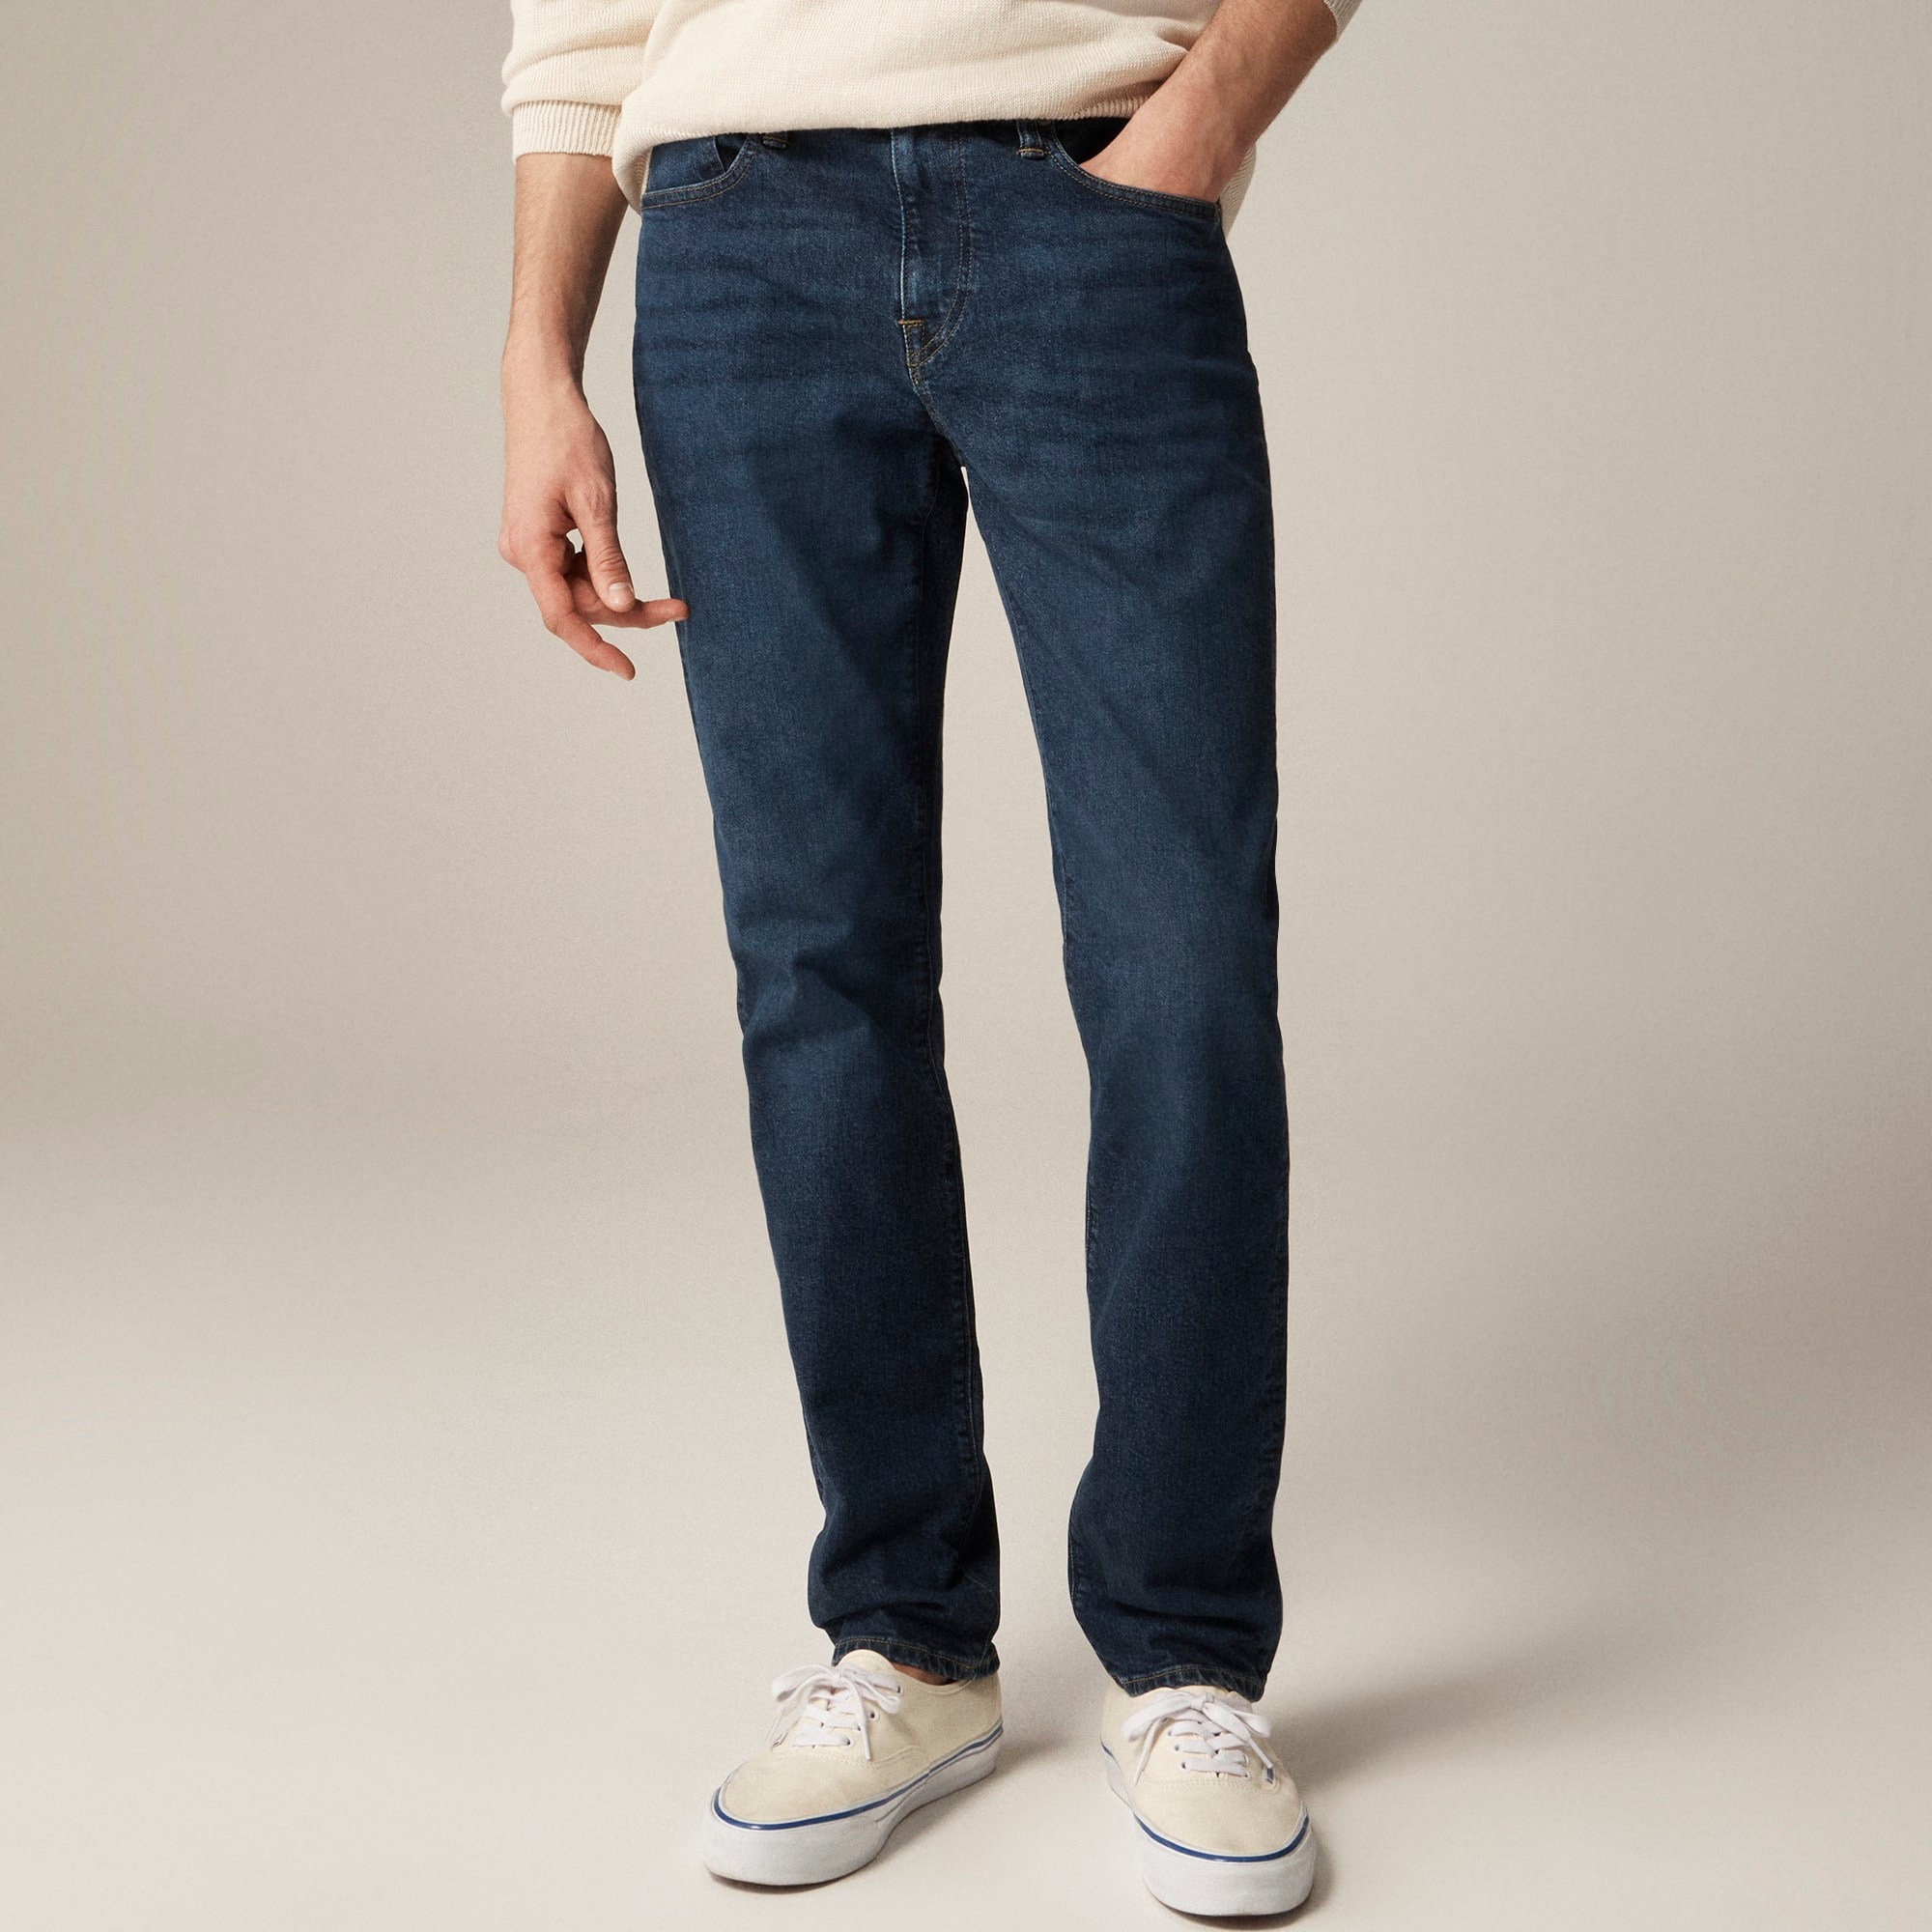 mens 484 Slim-fit stretch jean in one-year wash